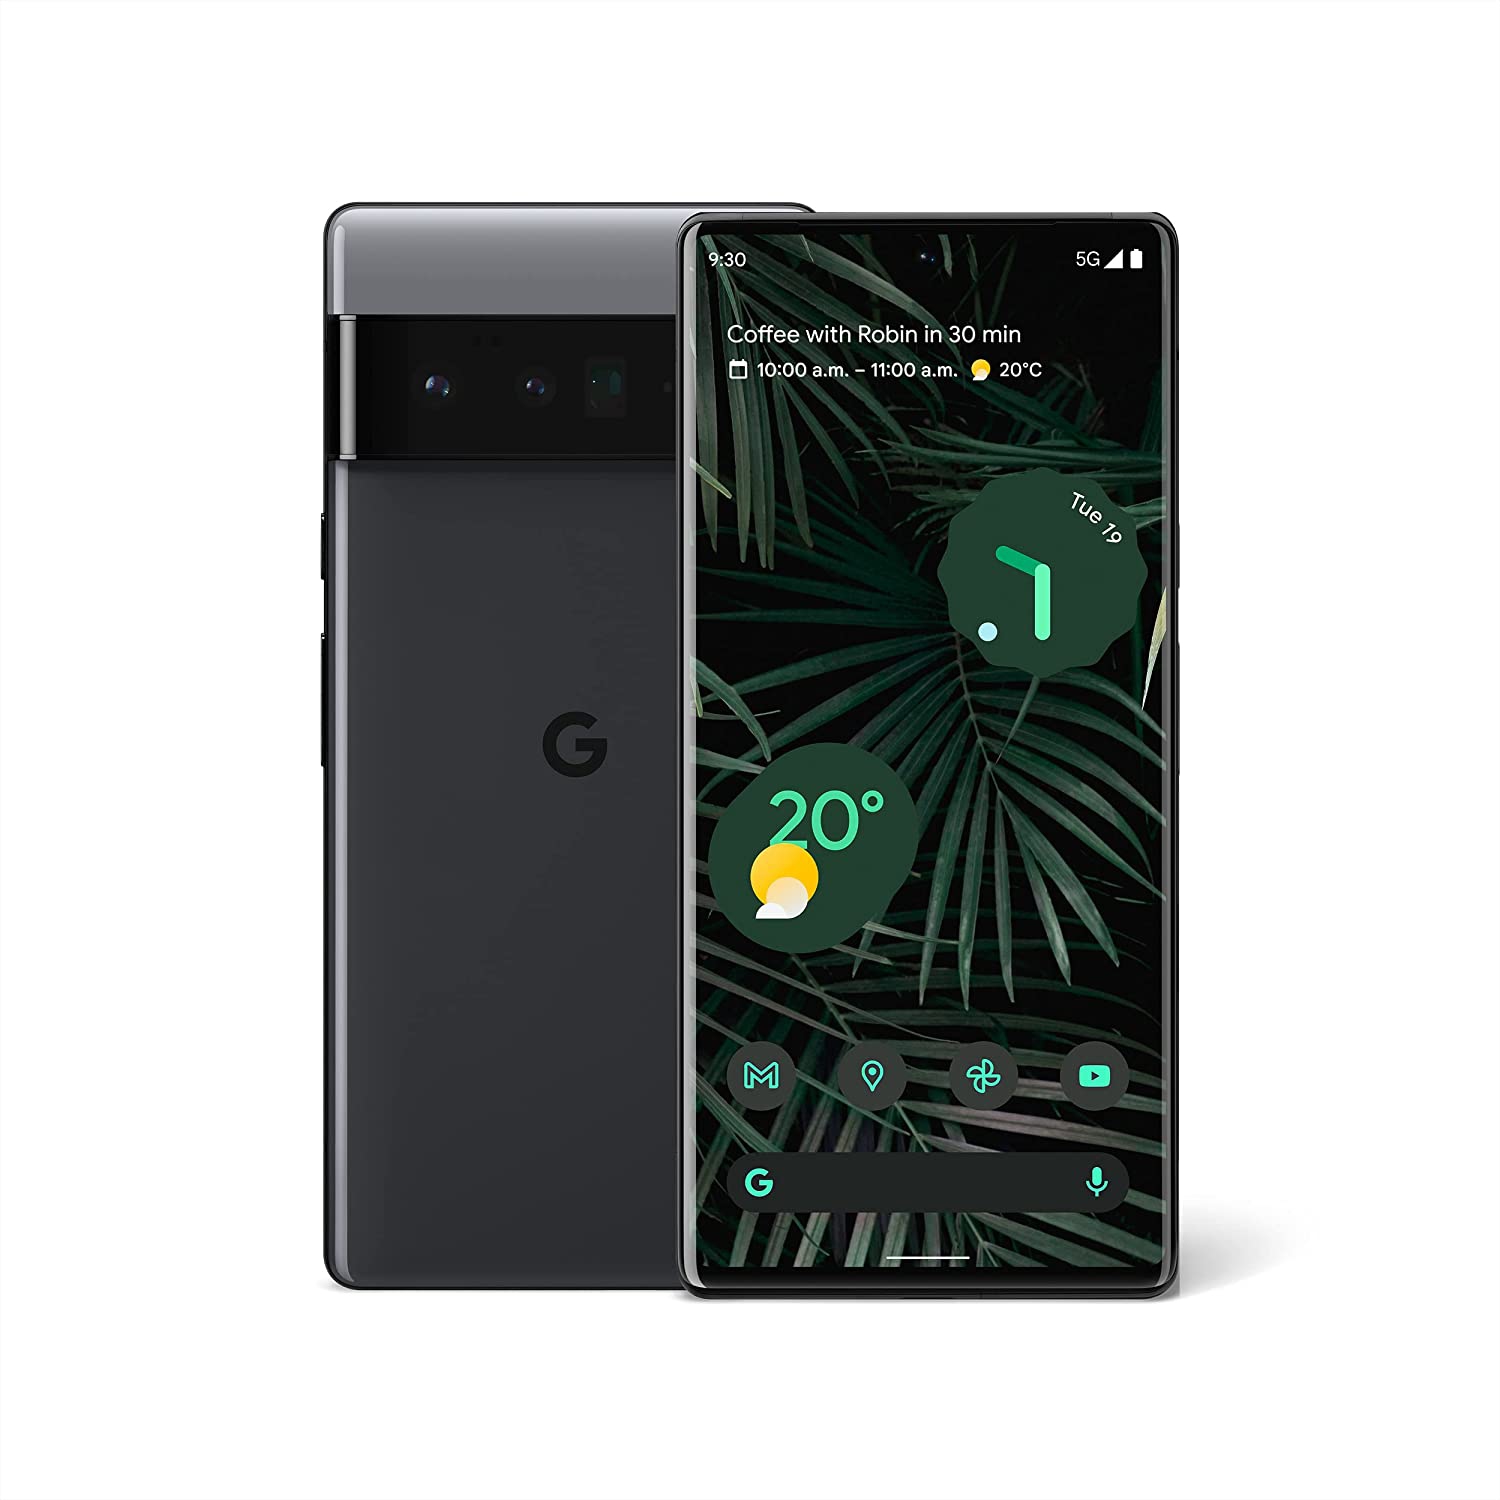 Google Pixel 6 Pro| Unlocked Android 5G Smartphone with 50-Megapixel Camera and Wide-Angle Lens| 128 GB – Stormy Black - New